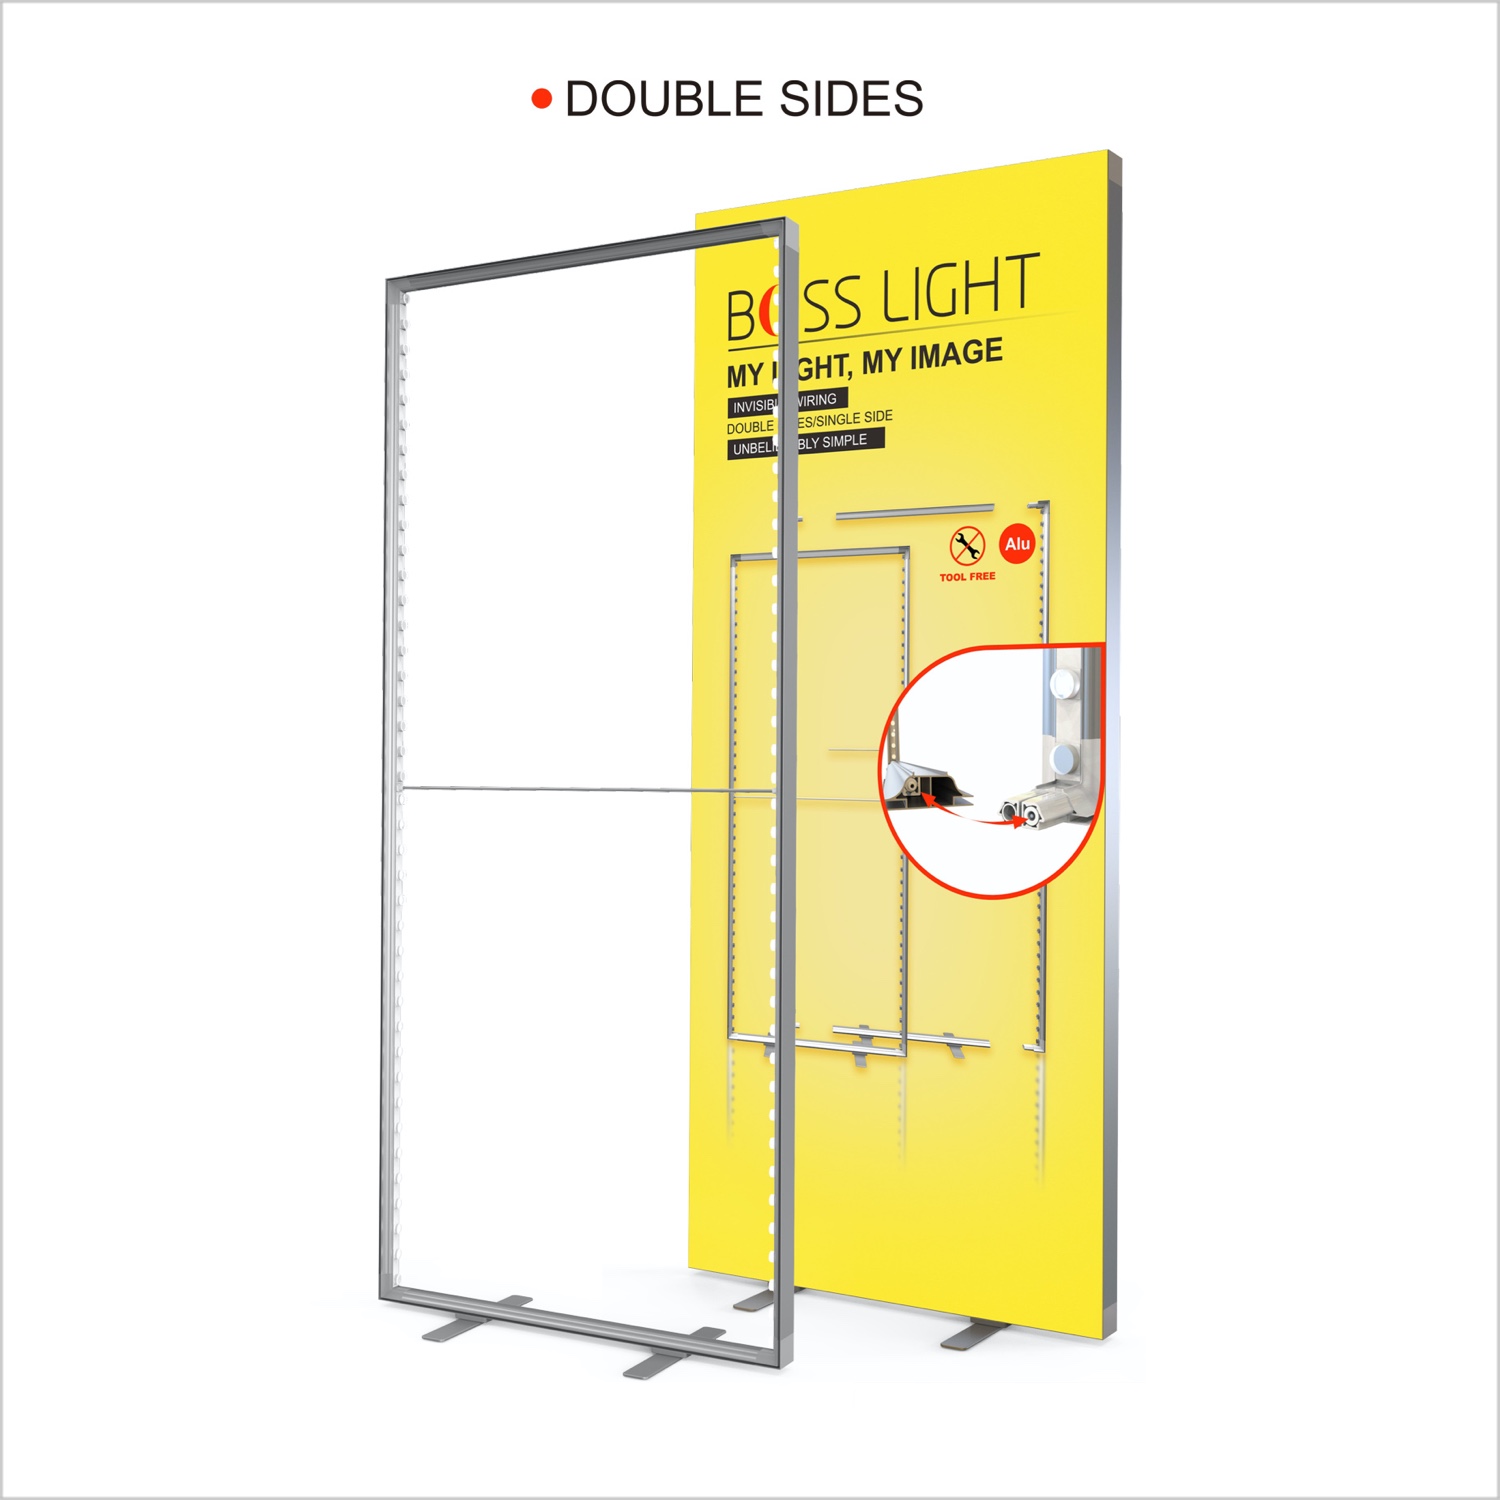 Thin Profile Double-sided LED Light Box Advertising Displays